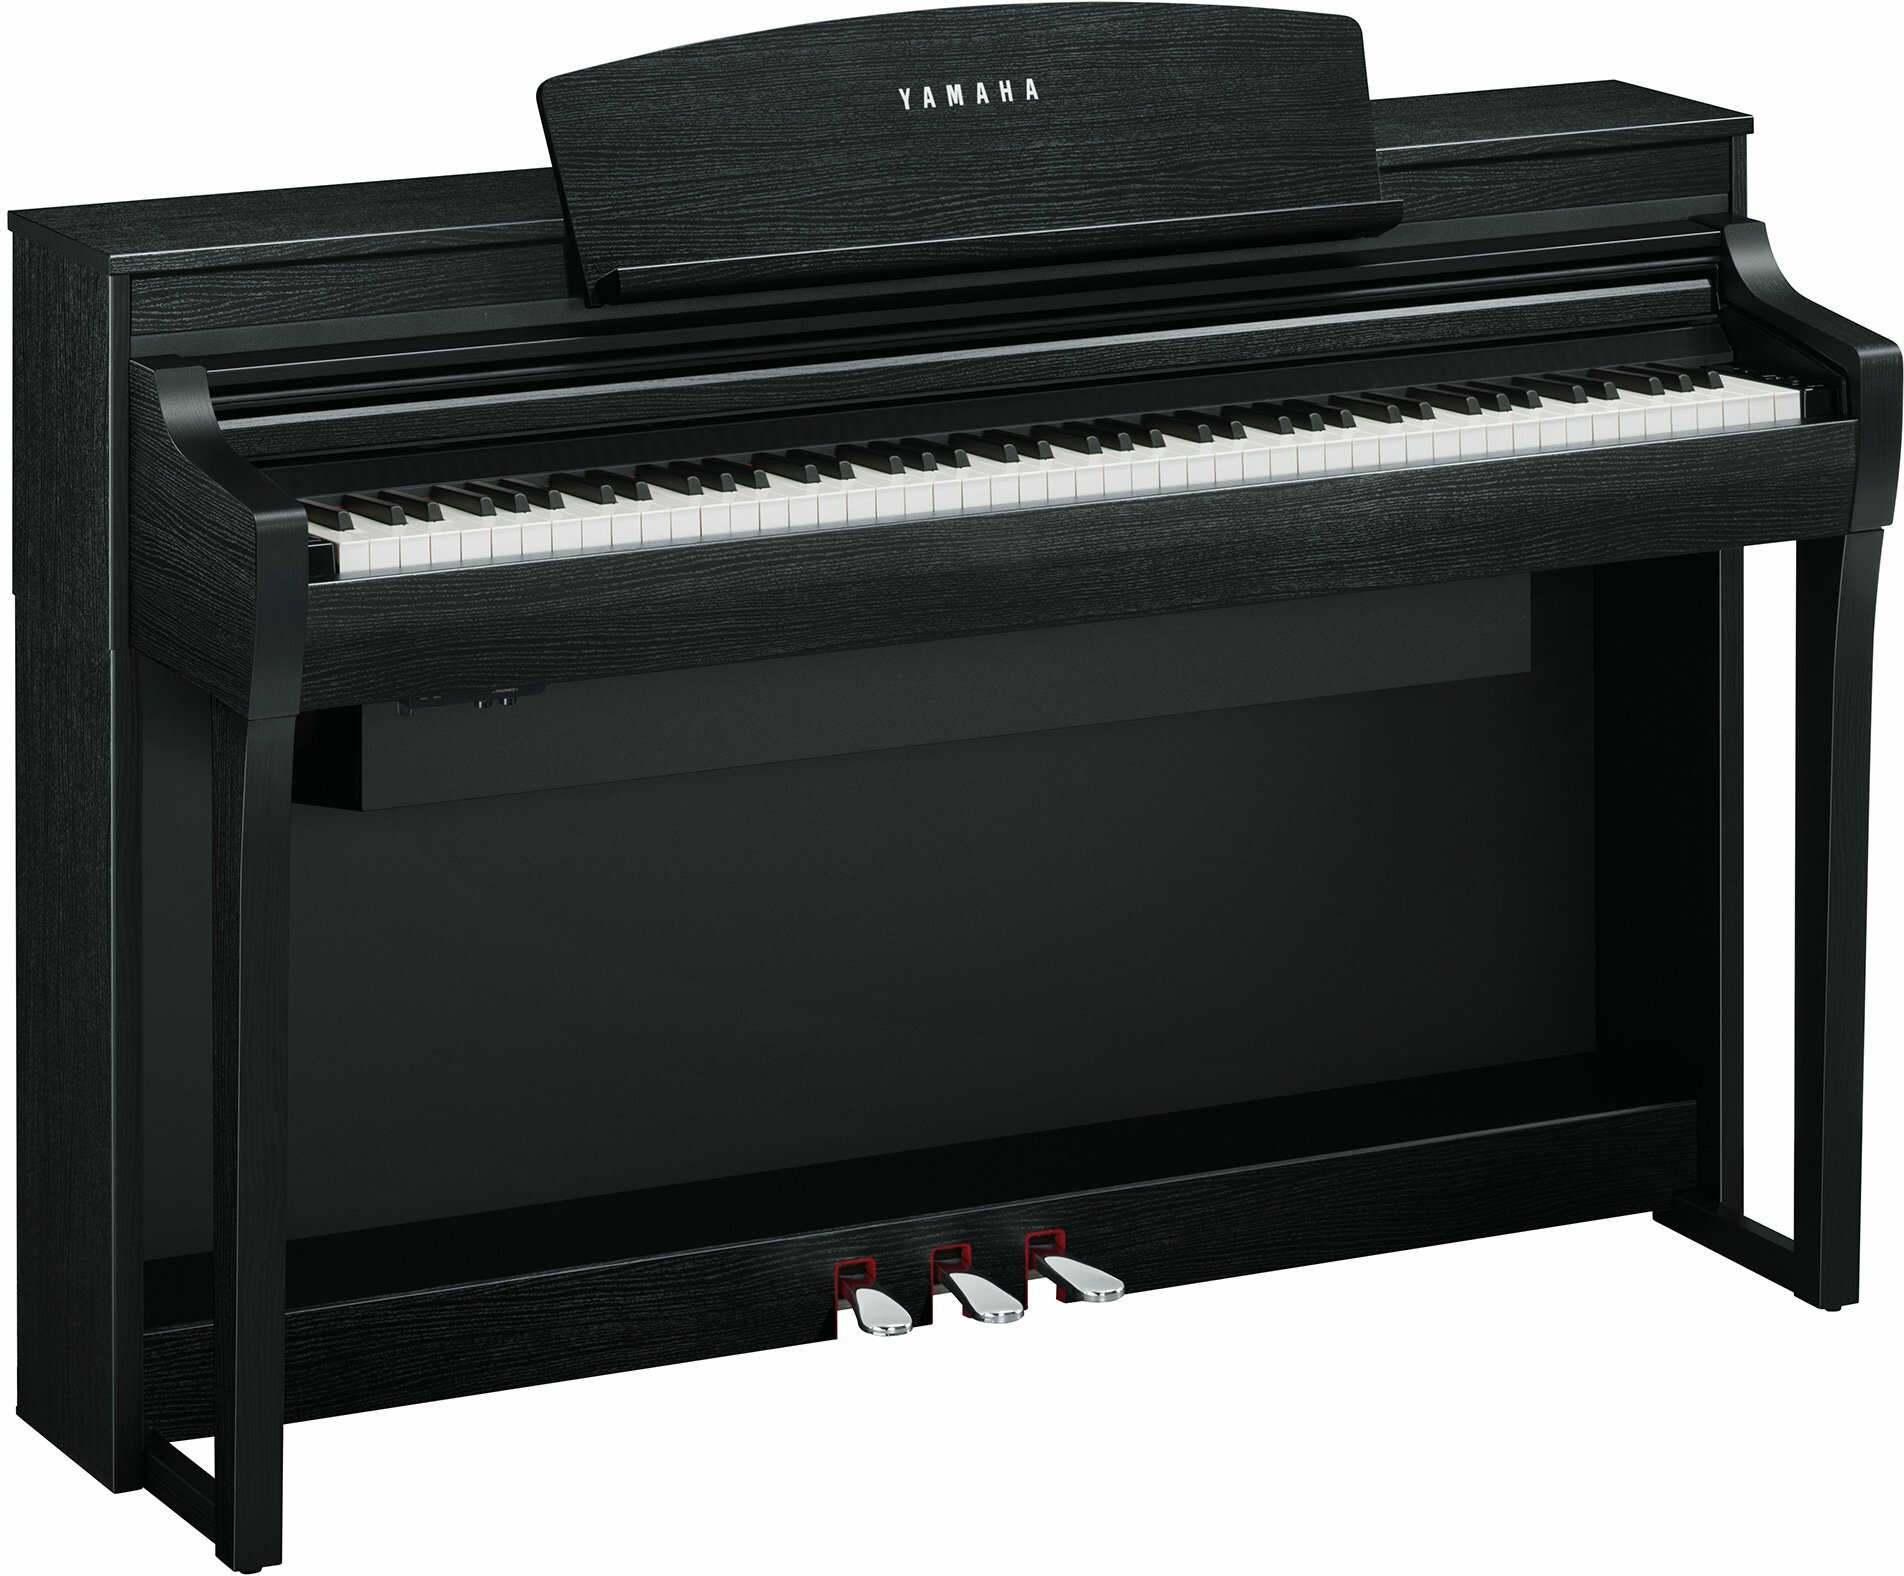 Yamaha Csp-275 B - Digital piano with stand - Main picture